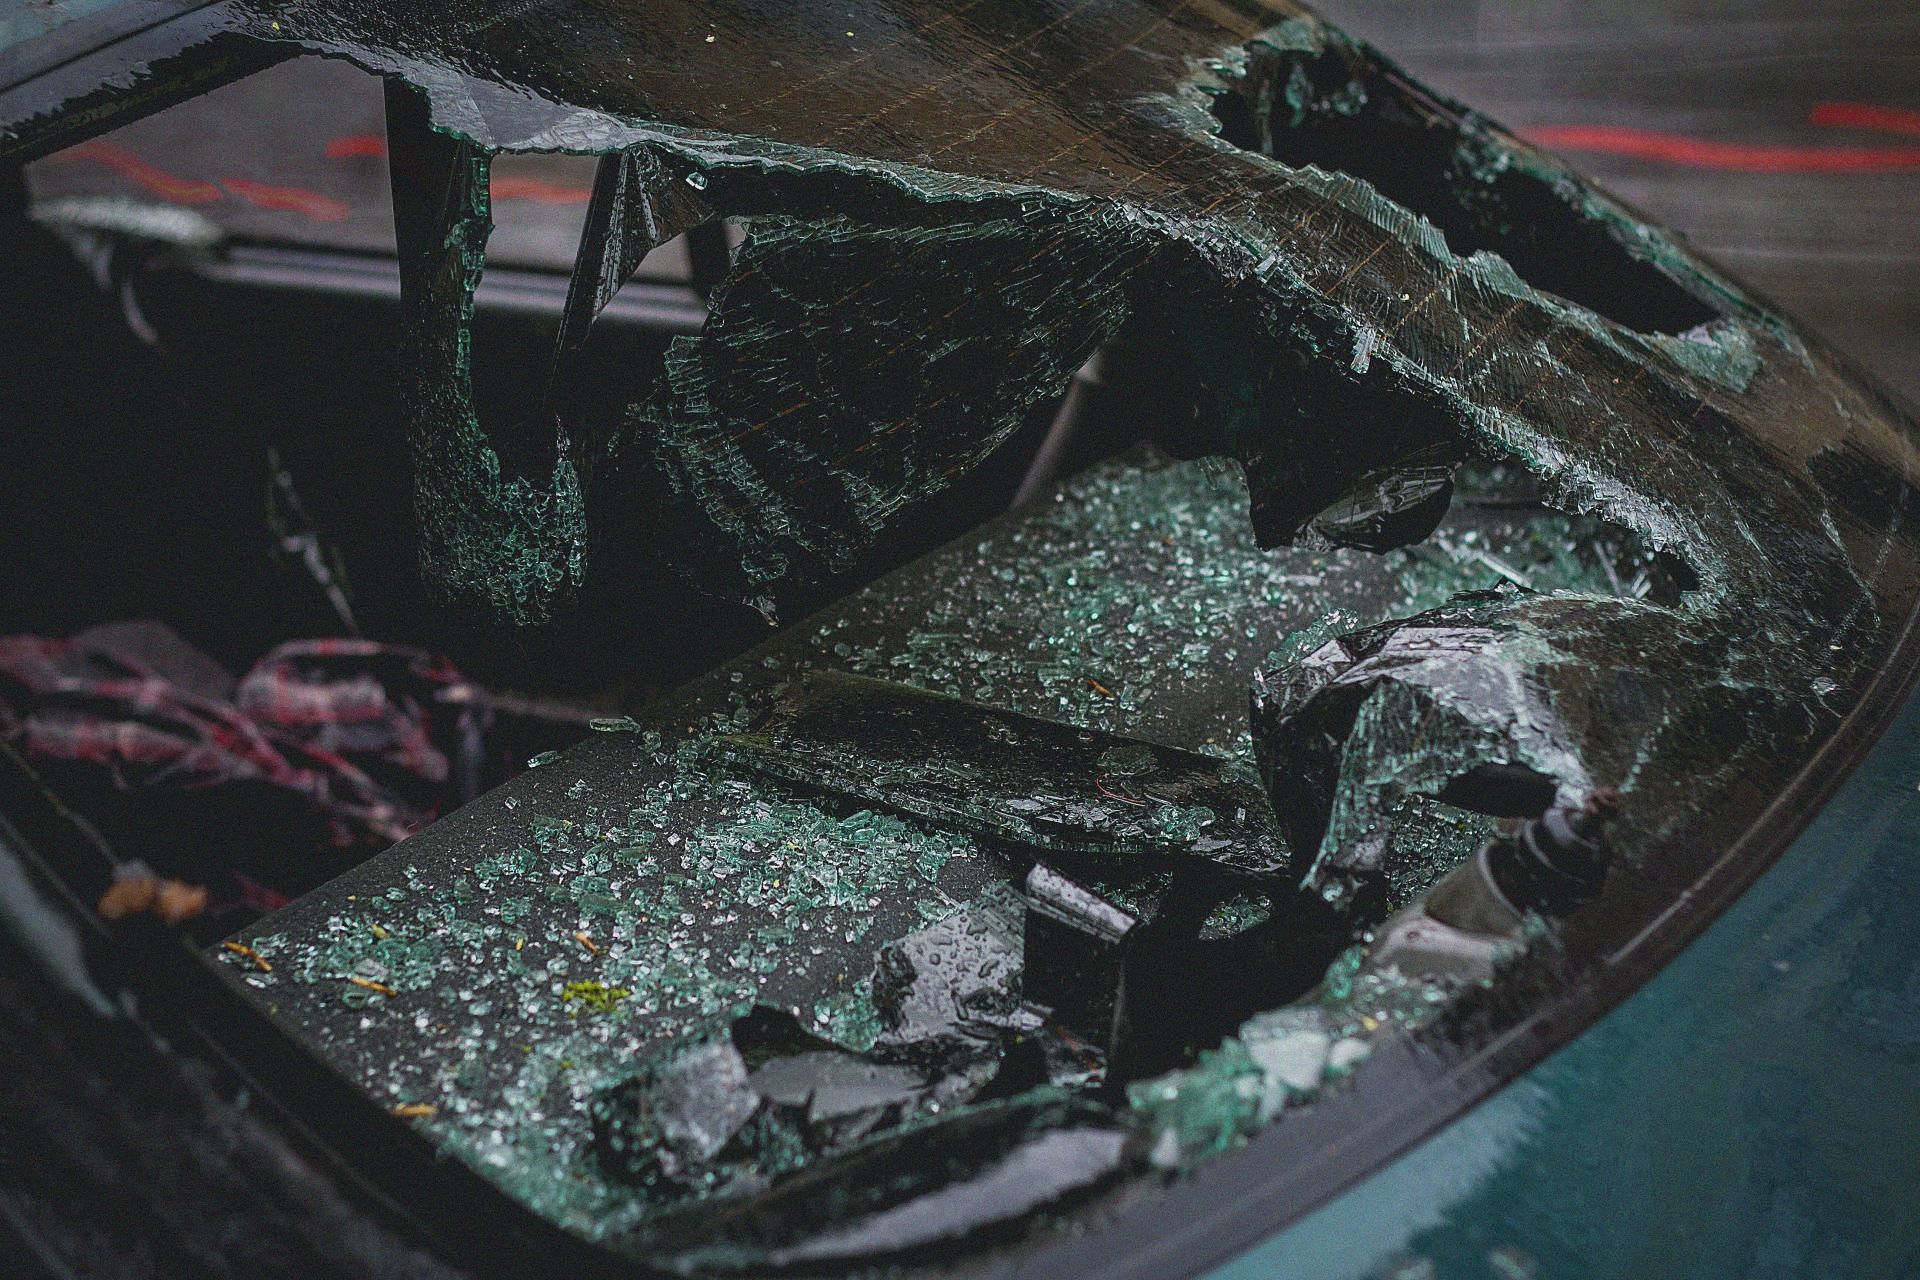 Mahek Bukhari and her mother were imprisoned for plotting a fatal car crash that ended with two people dead (Image via Pexels)